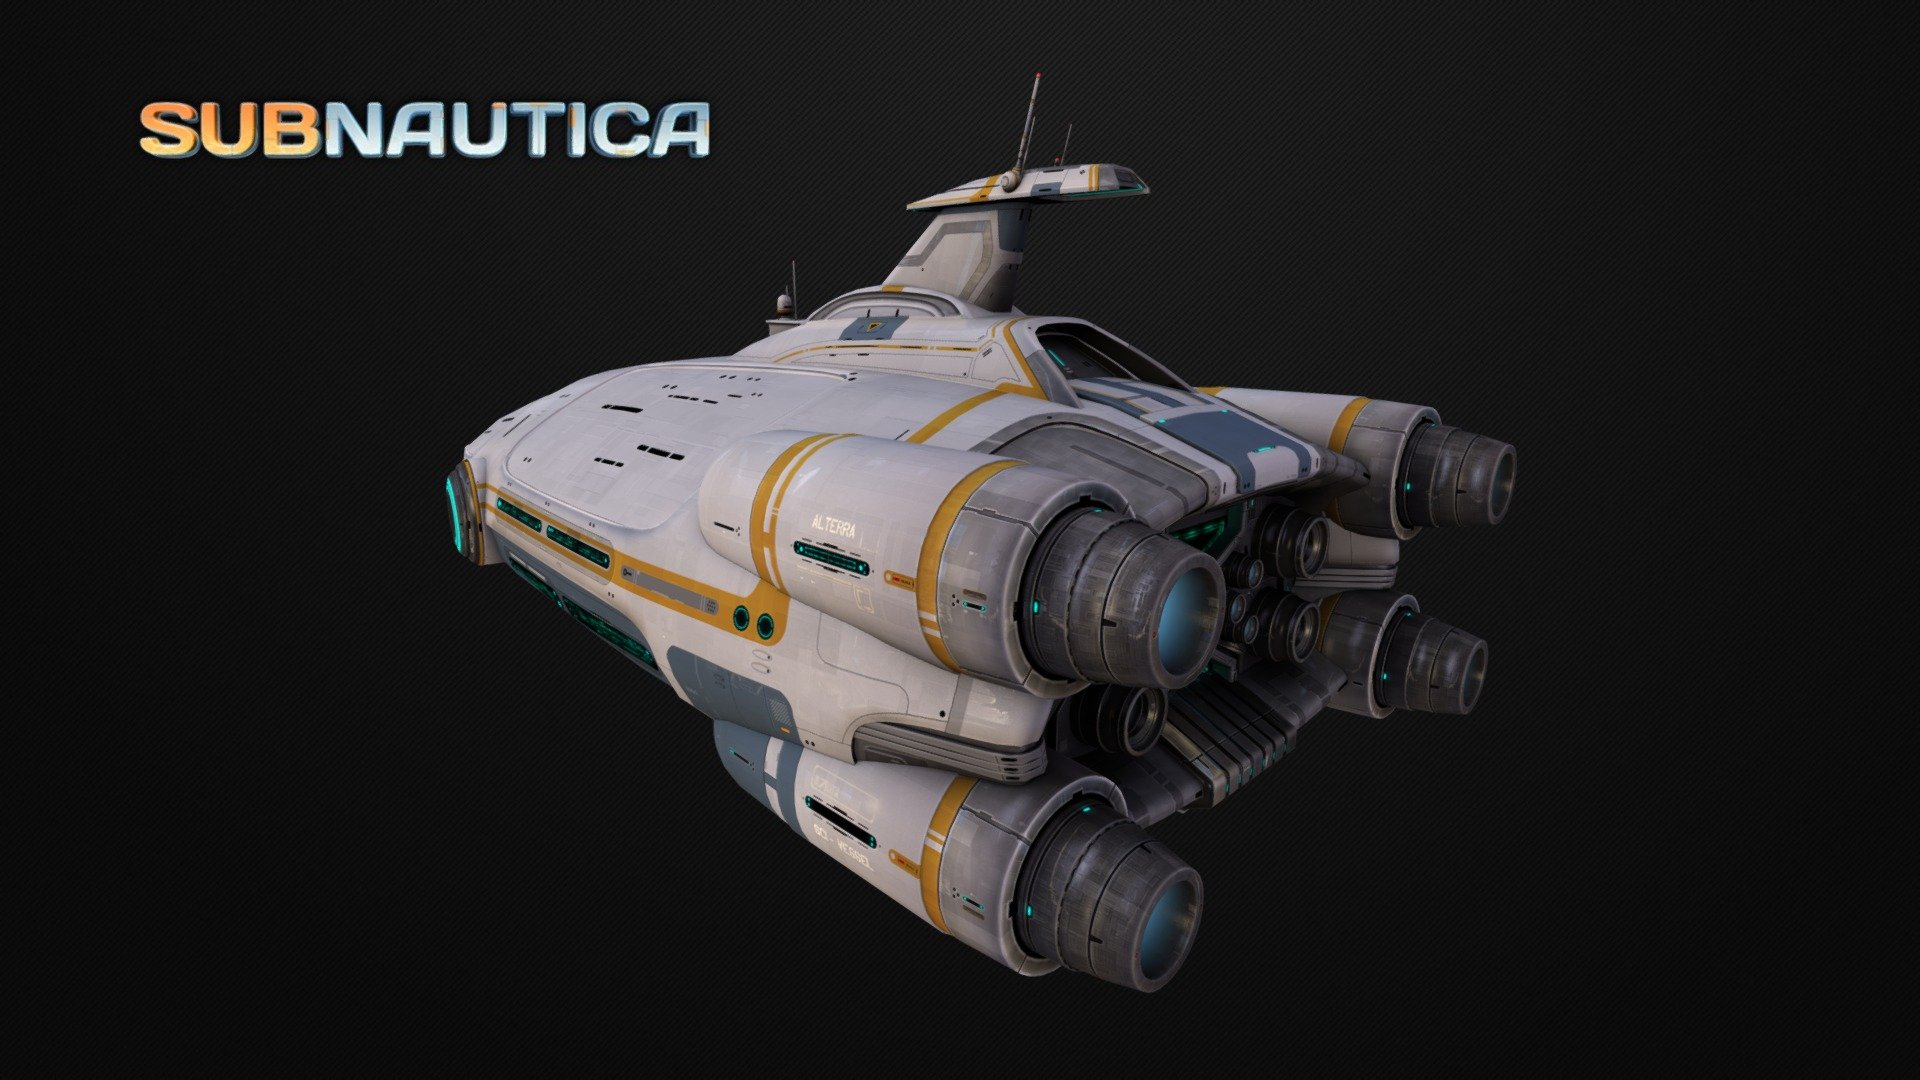 http://unknownworlds.com/subnautica/ - starship - 3D model by Fox3D 3d model